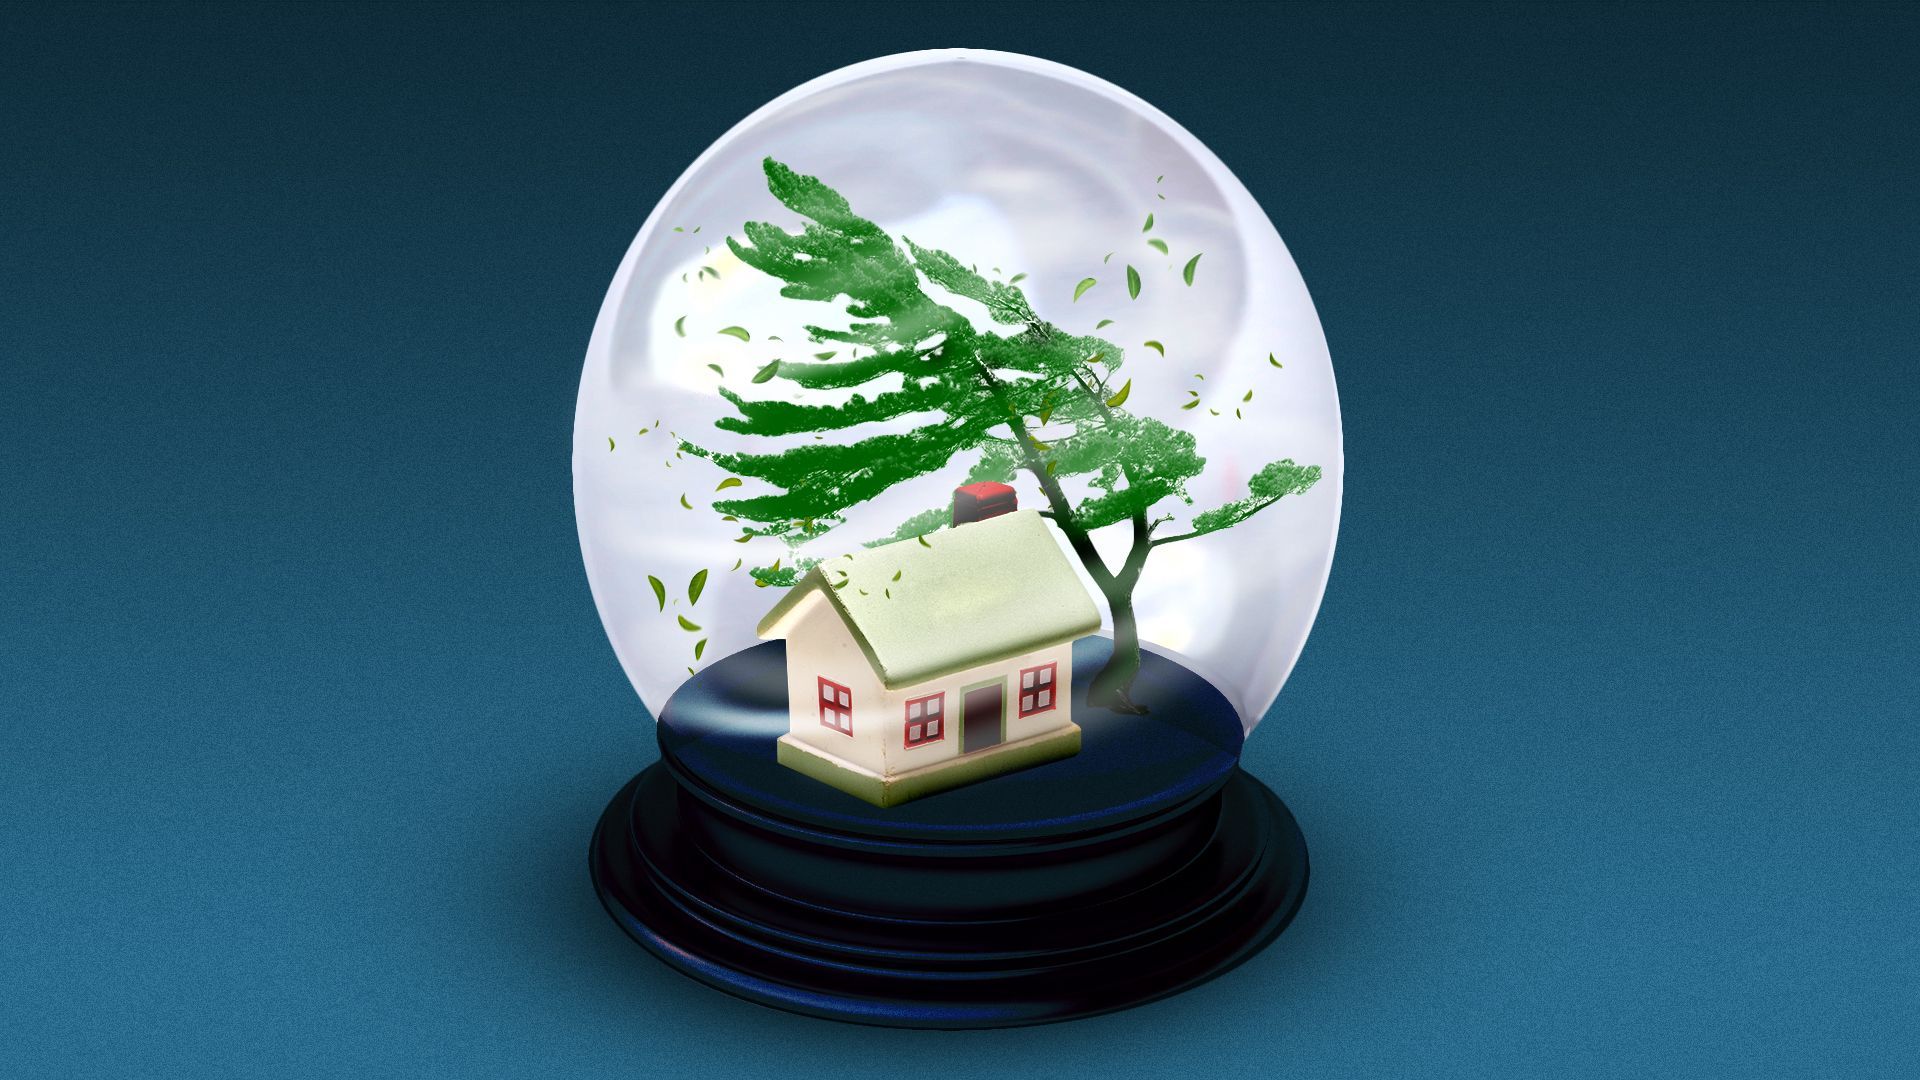 Illustration of a snow globe filled with a windswept house and tree